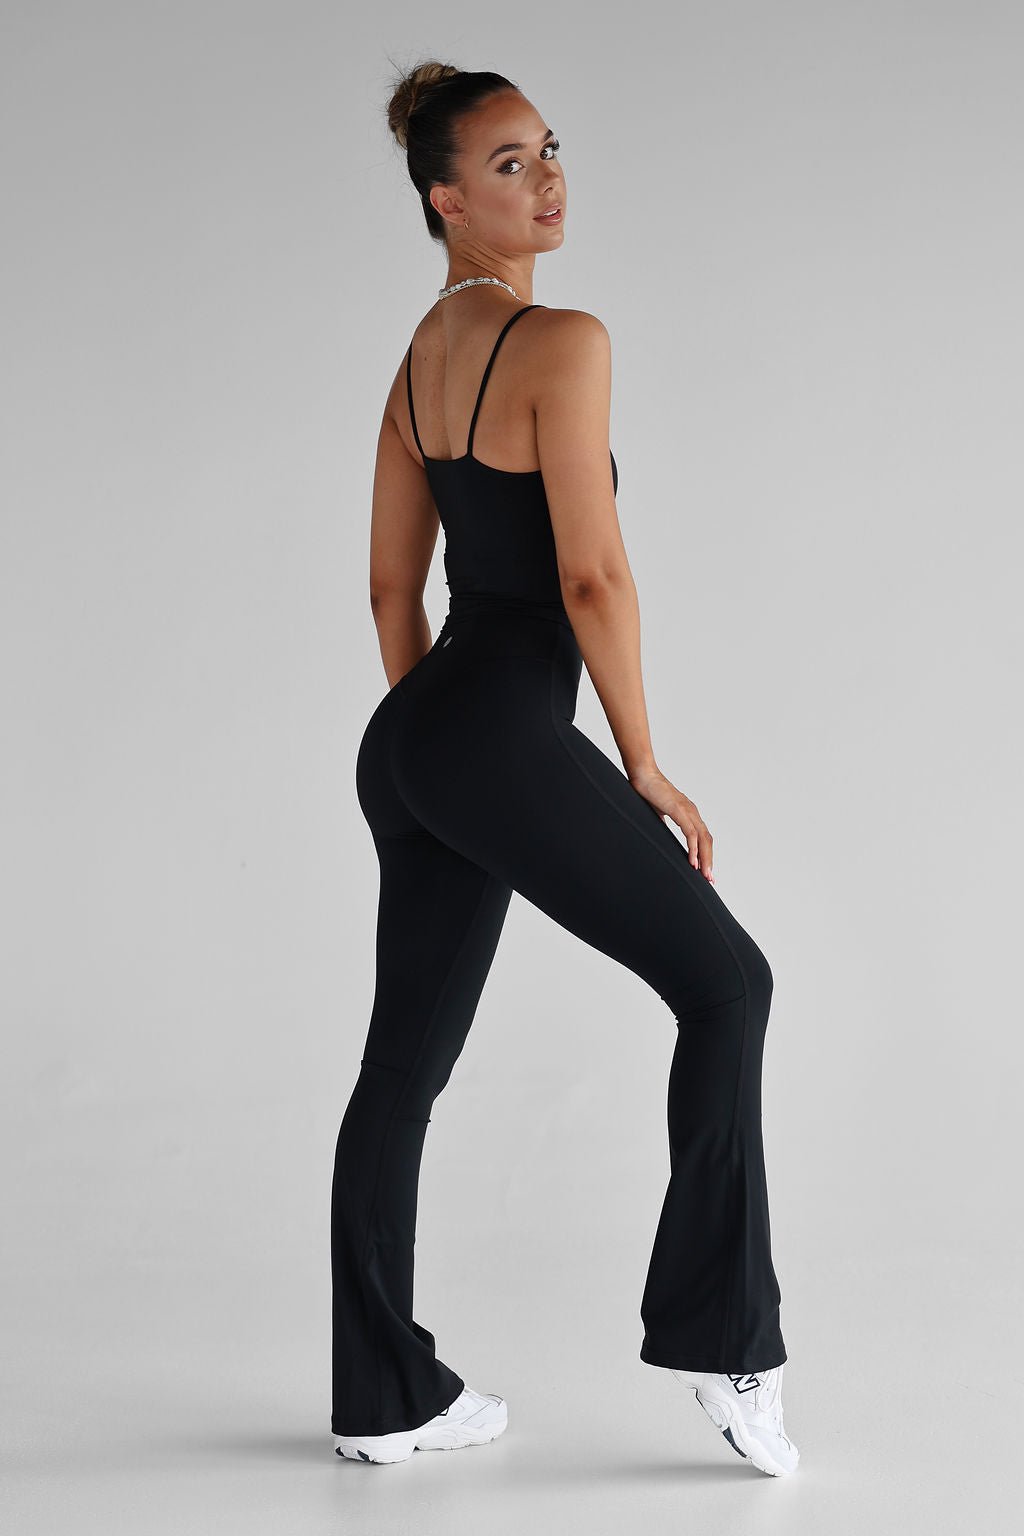 We Review Wolven's Flare Leggings, A Viral TikTok Style